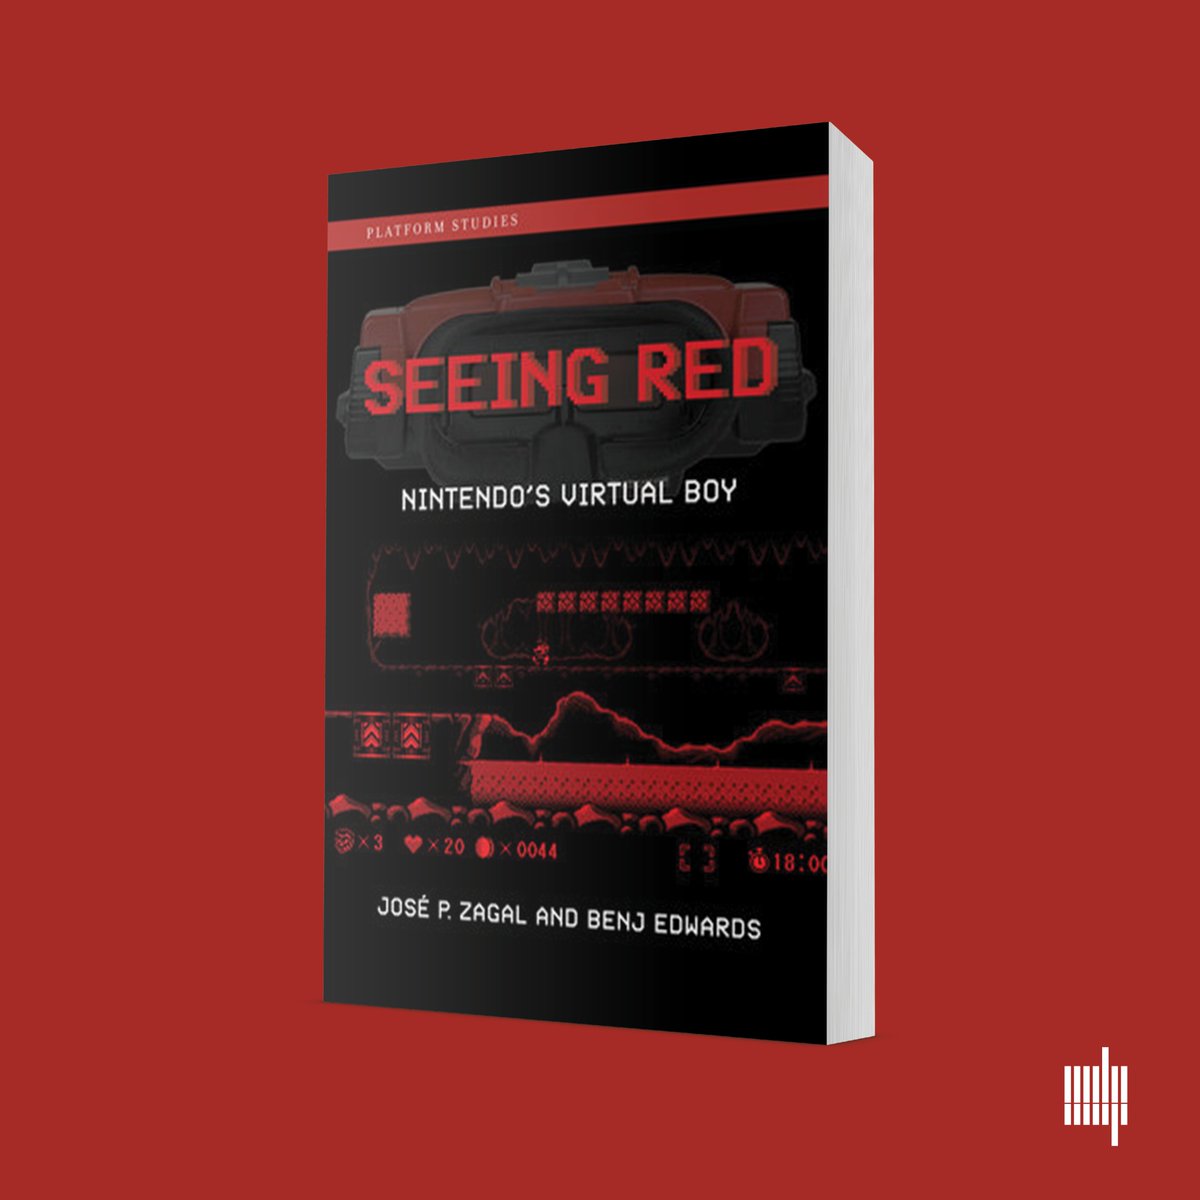 Attention Virtual Boy Fans! I co-wrote a Platform Studies book called Seeing Red: Nintendo's Virtual Boy with @JoseZagal for MIT Press, and it's coming out May 14th You can pre-order it now on Amazon if you're wild about stereoscopic red consoles: amazon.com/Seeing-Red-Nin…